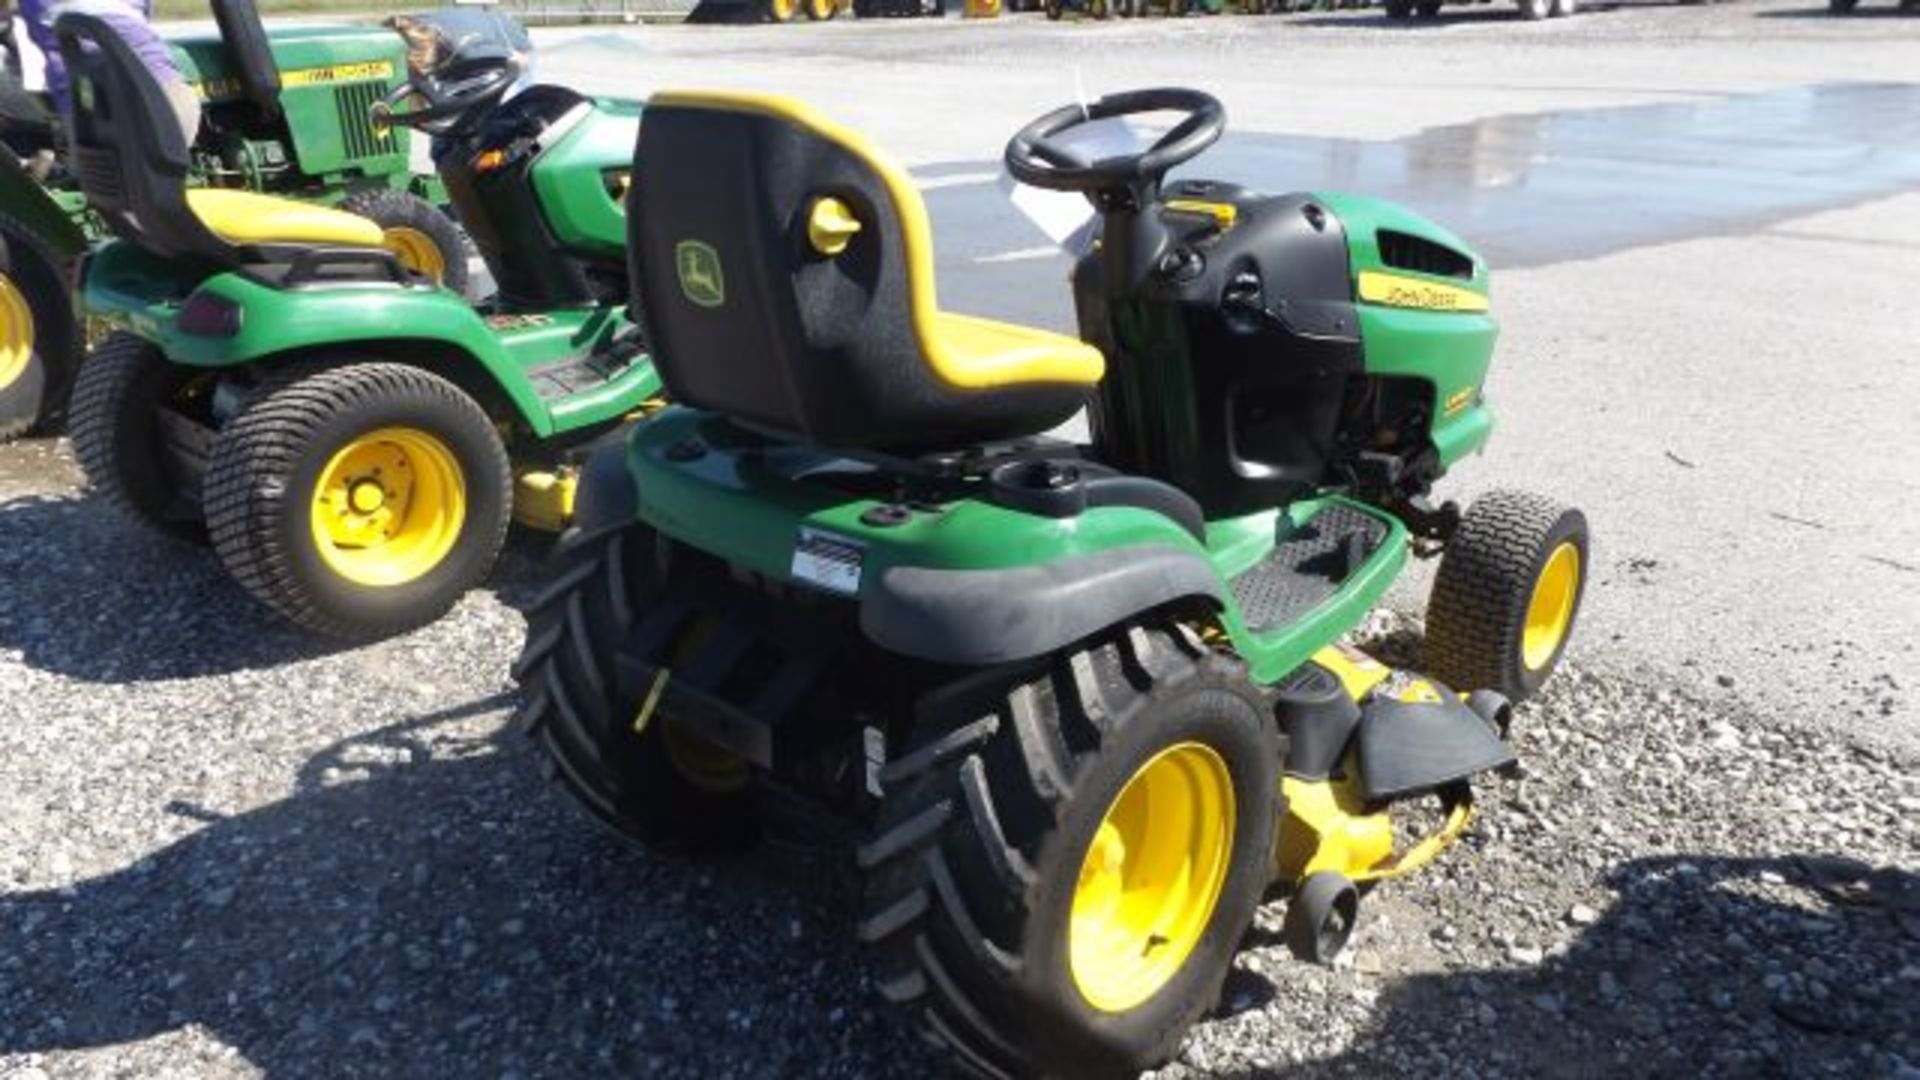 2007 JD LA140 Mower #112059, 158 hrs, 48" Deck, 23hp Briggs, Air Cooled, Hydro, Rear Weights, 46" - Image 3 of 3